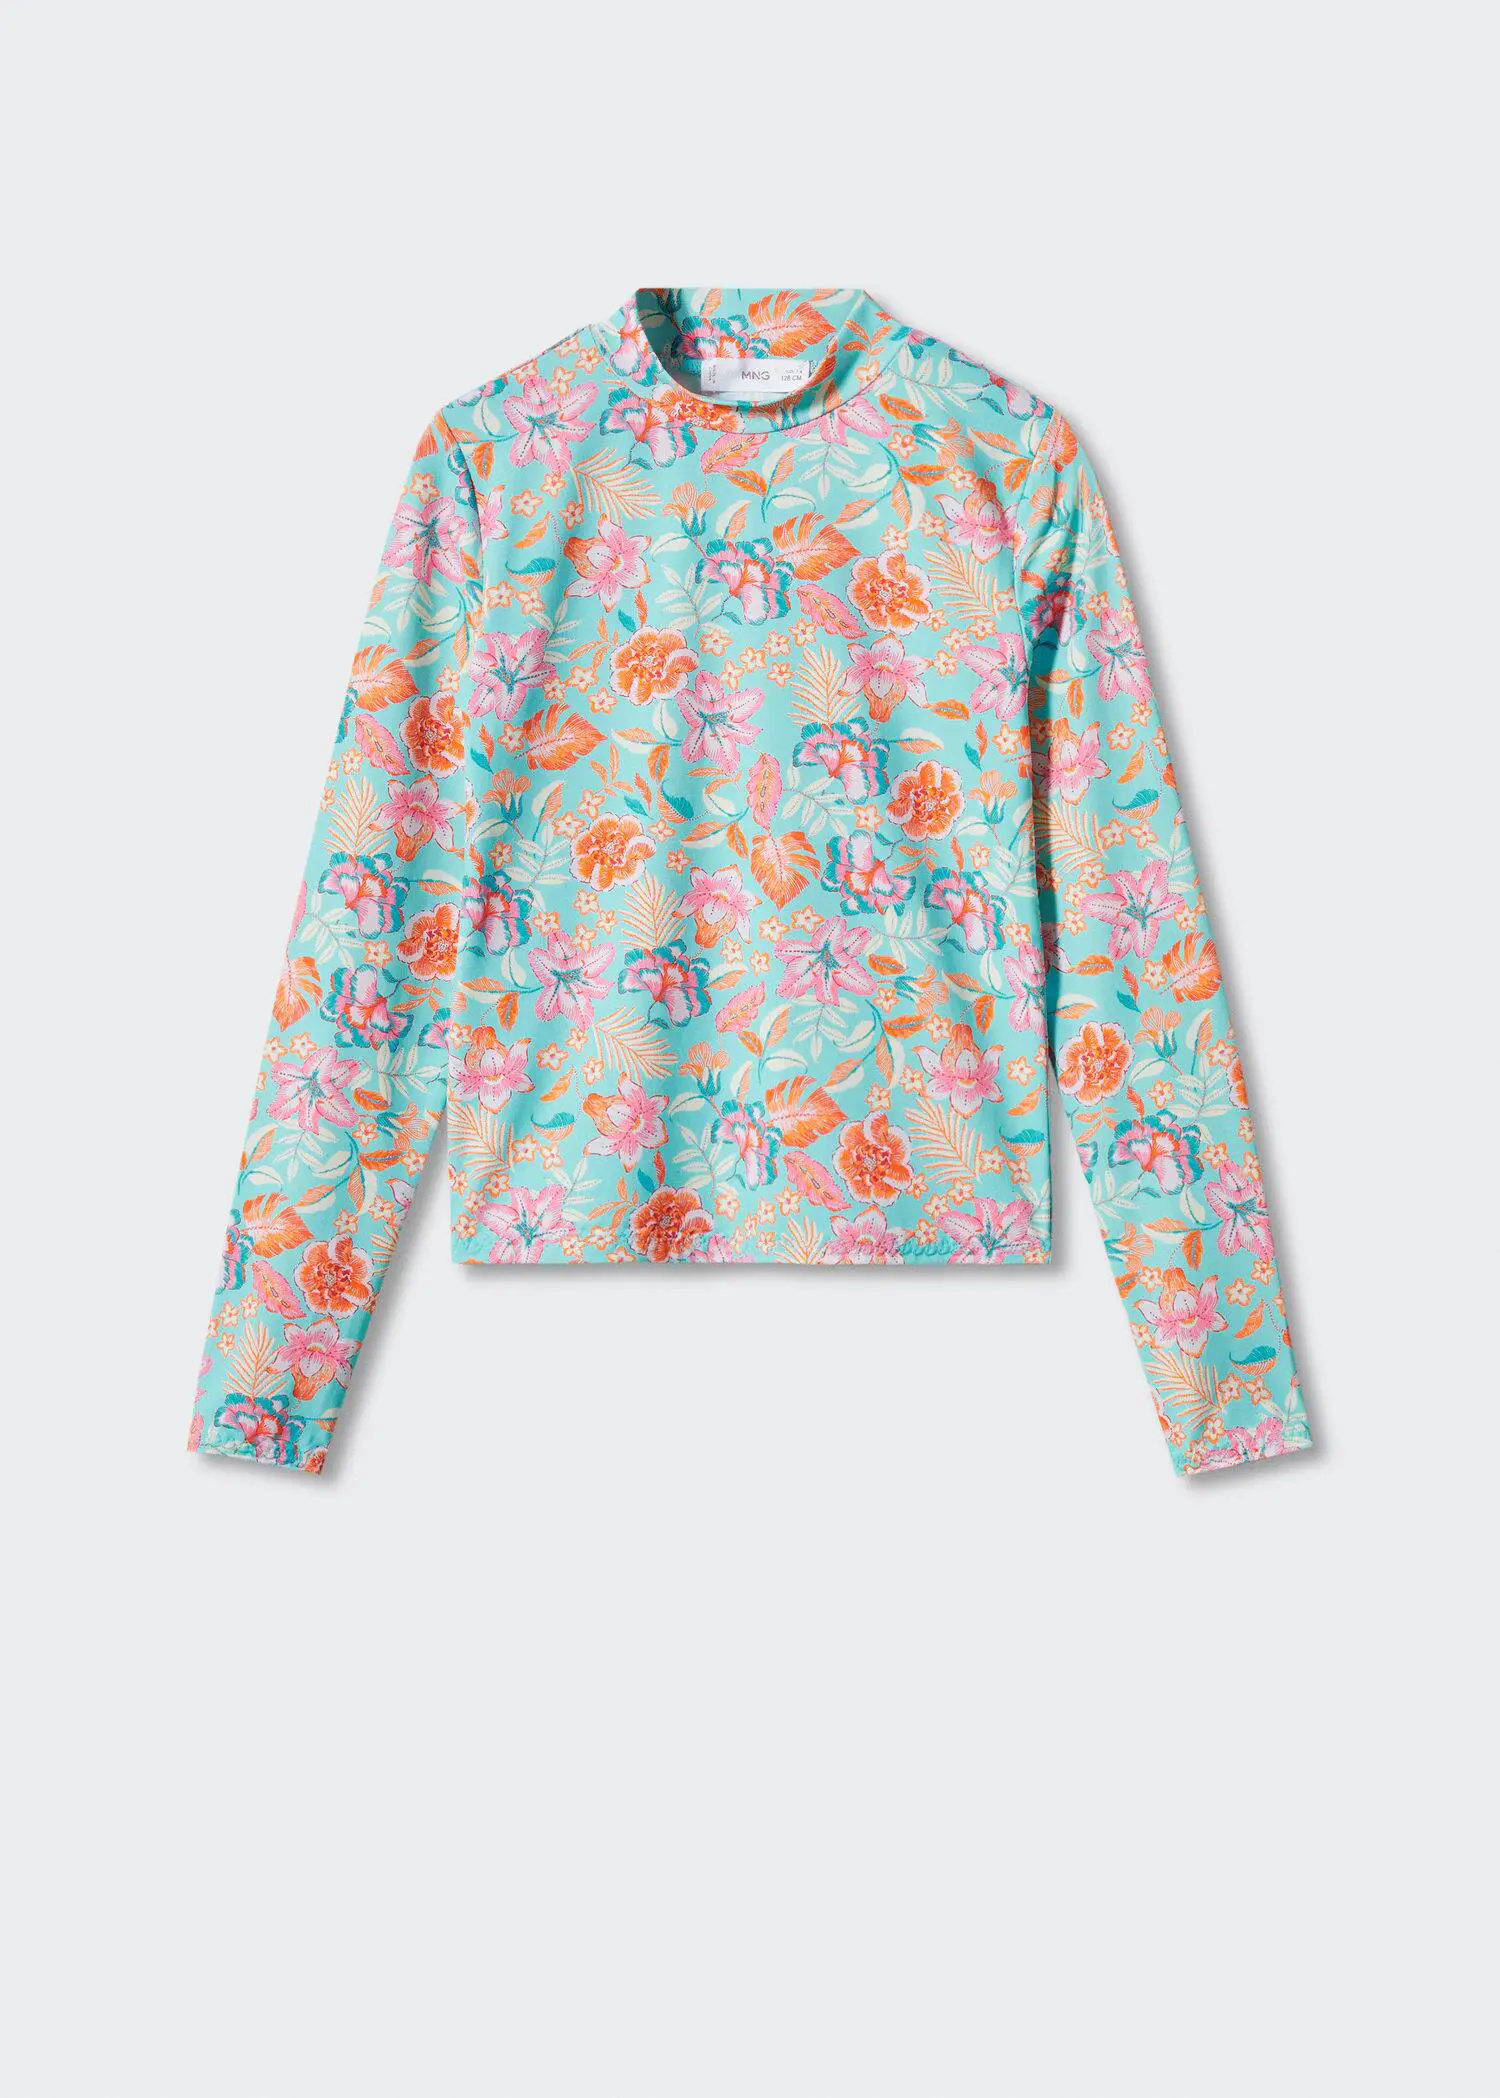 Mango Printed long sleeve t-shirt. a long sleeved shirt with a floral print. 